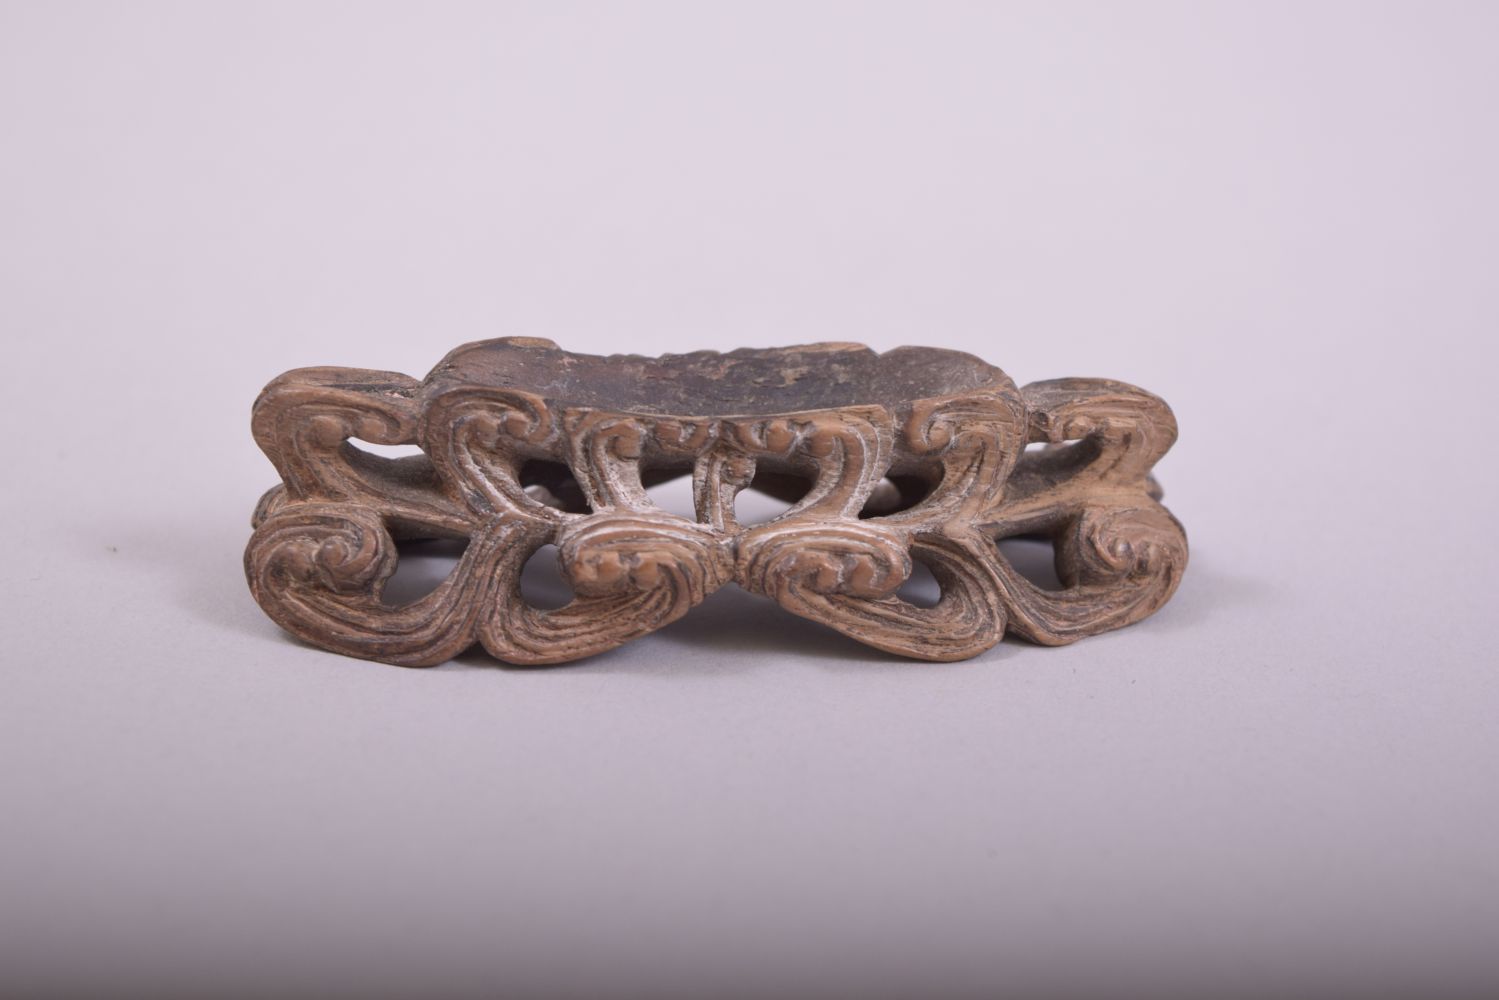 A SMALL CHINESE FILIGREE MODEL OF A JUNK, on a wooden stand, 7.5cm long. - Image 6 of 7